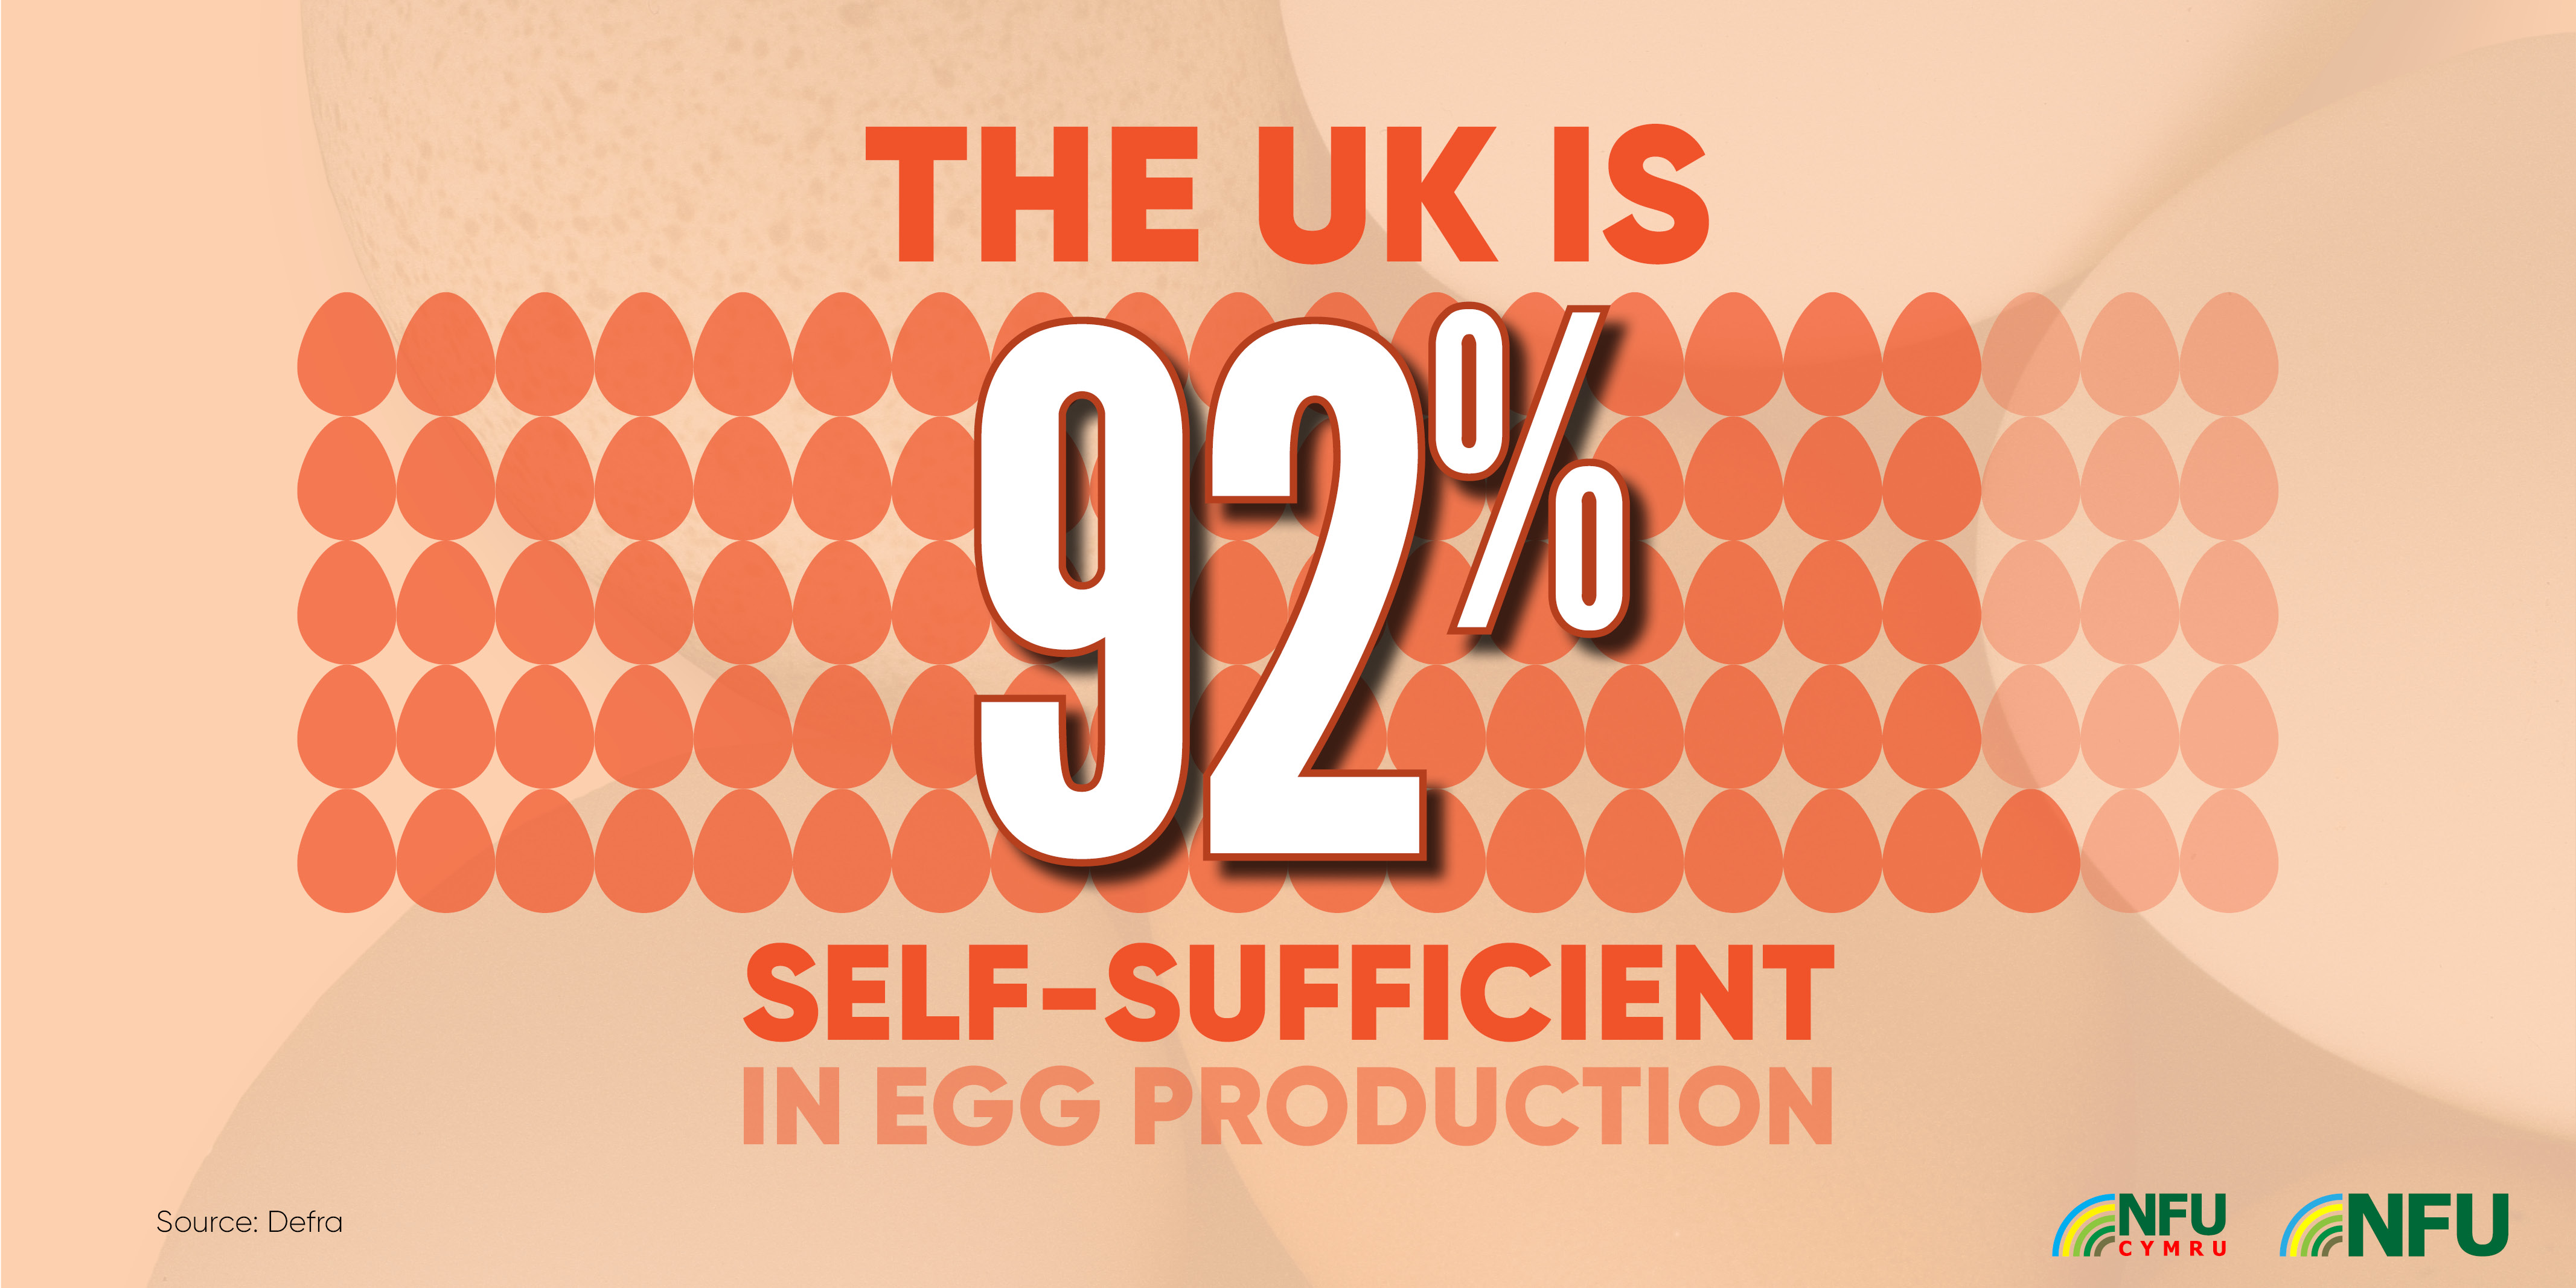 The UK is 92% self-sufficient 